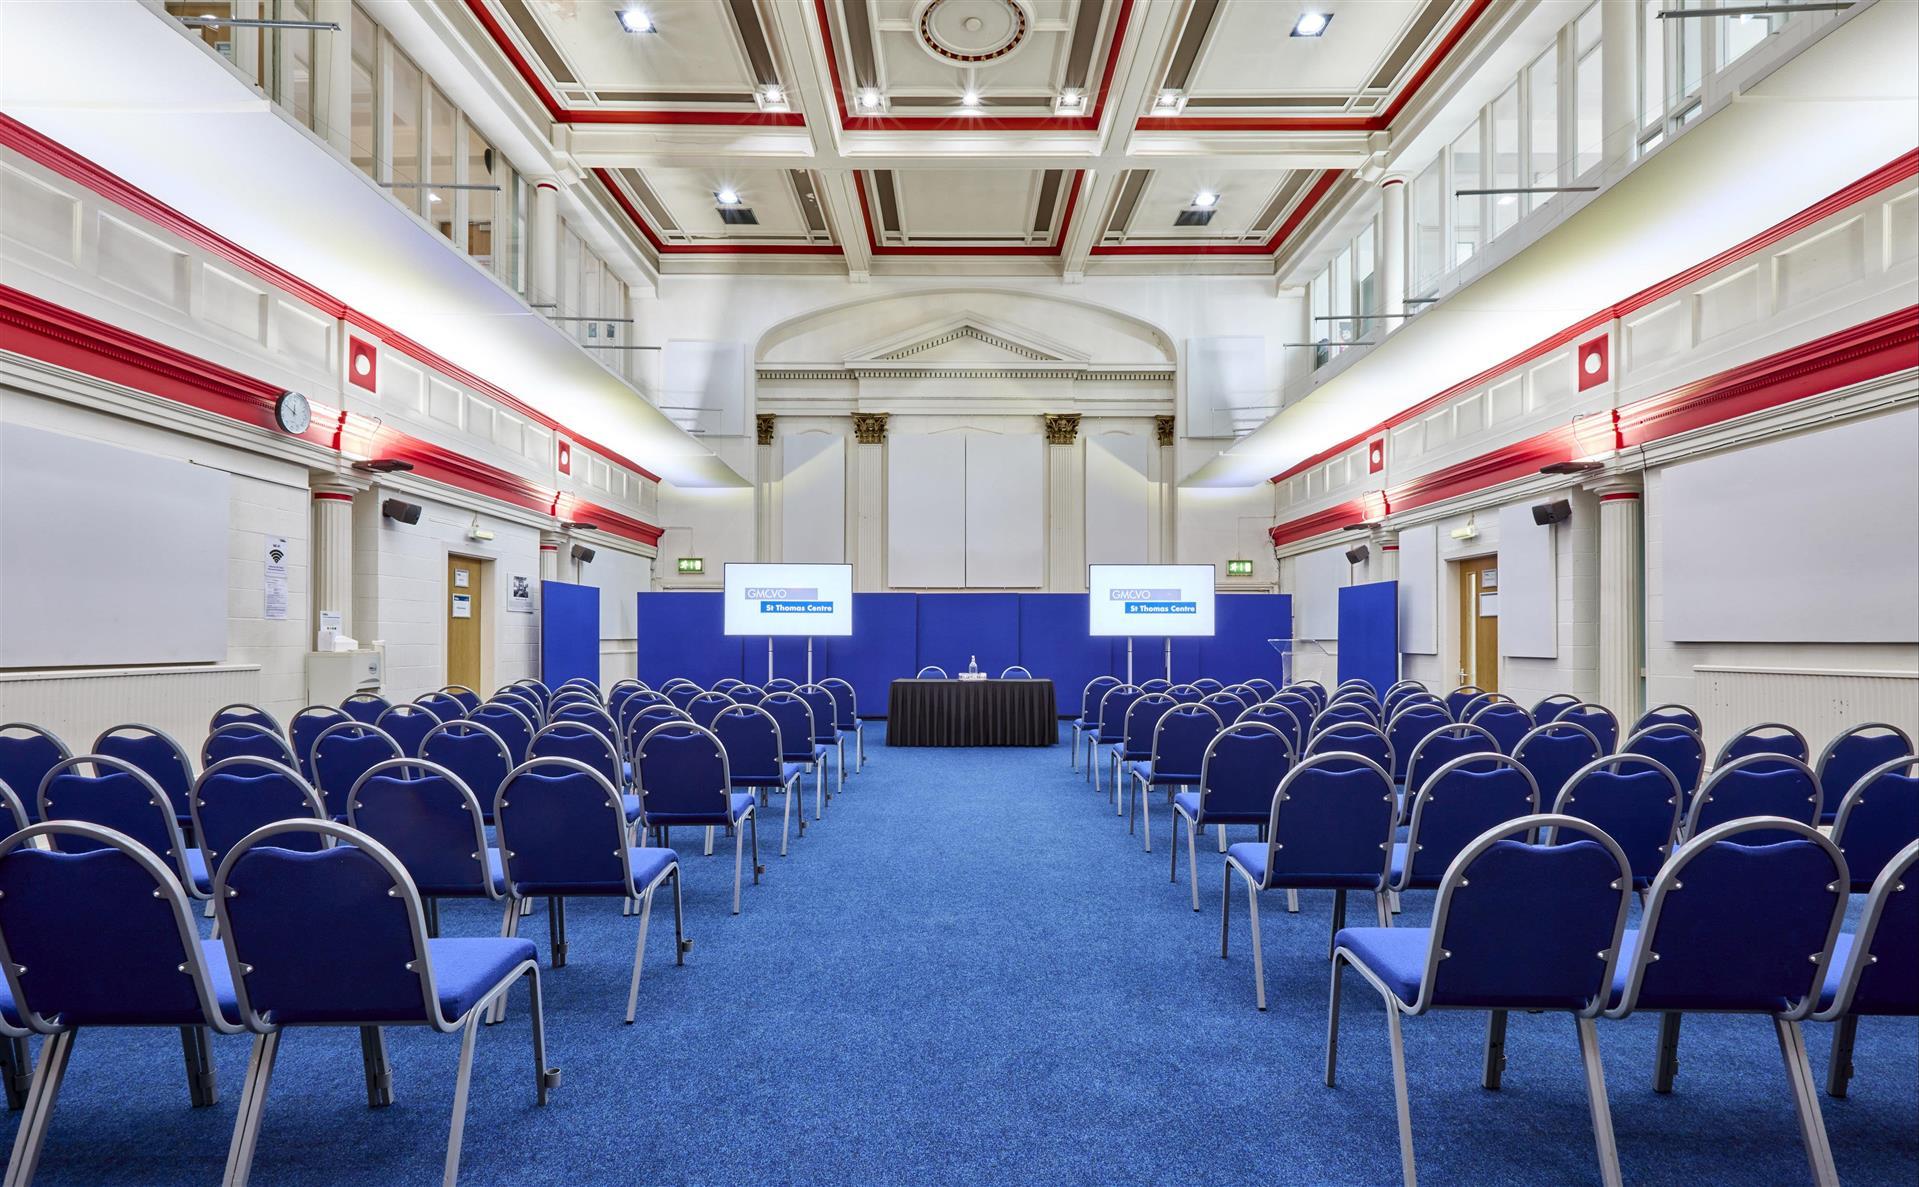 St Thomas Conference Centre in Manchester, GB1